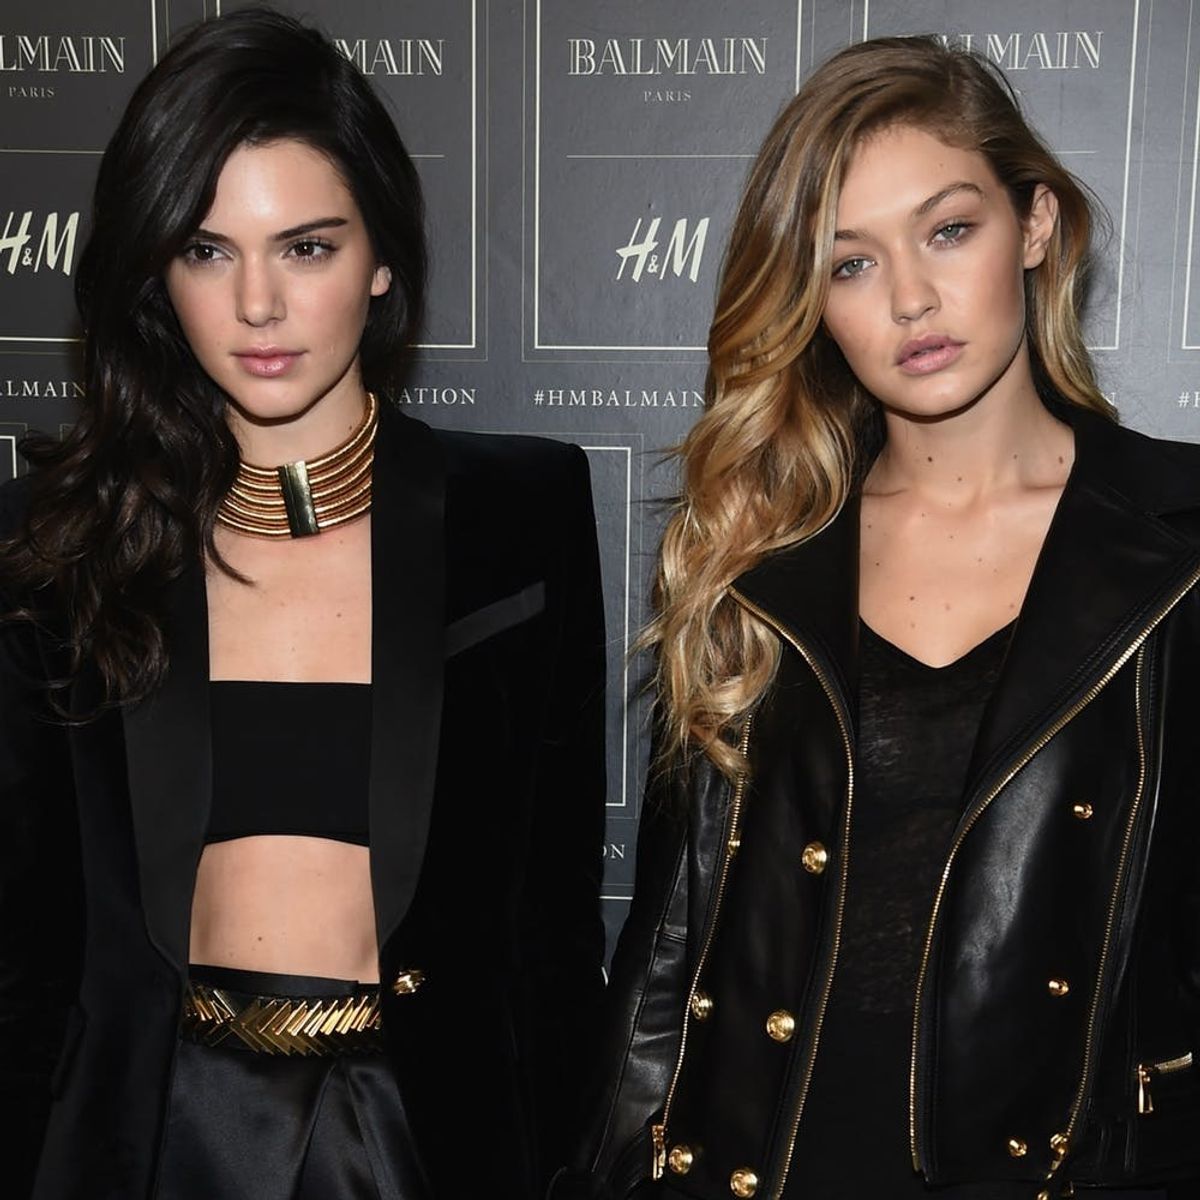 Uh Oh: Is Bad Blood Brewing Between BFFs Kendall Jenner and Gigi Hadid?